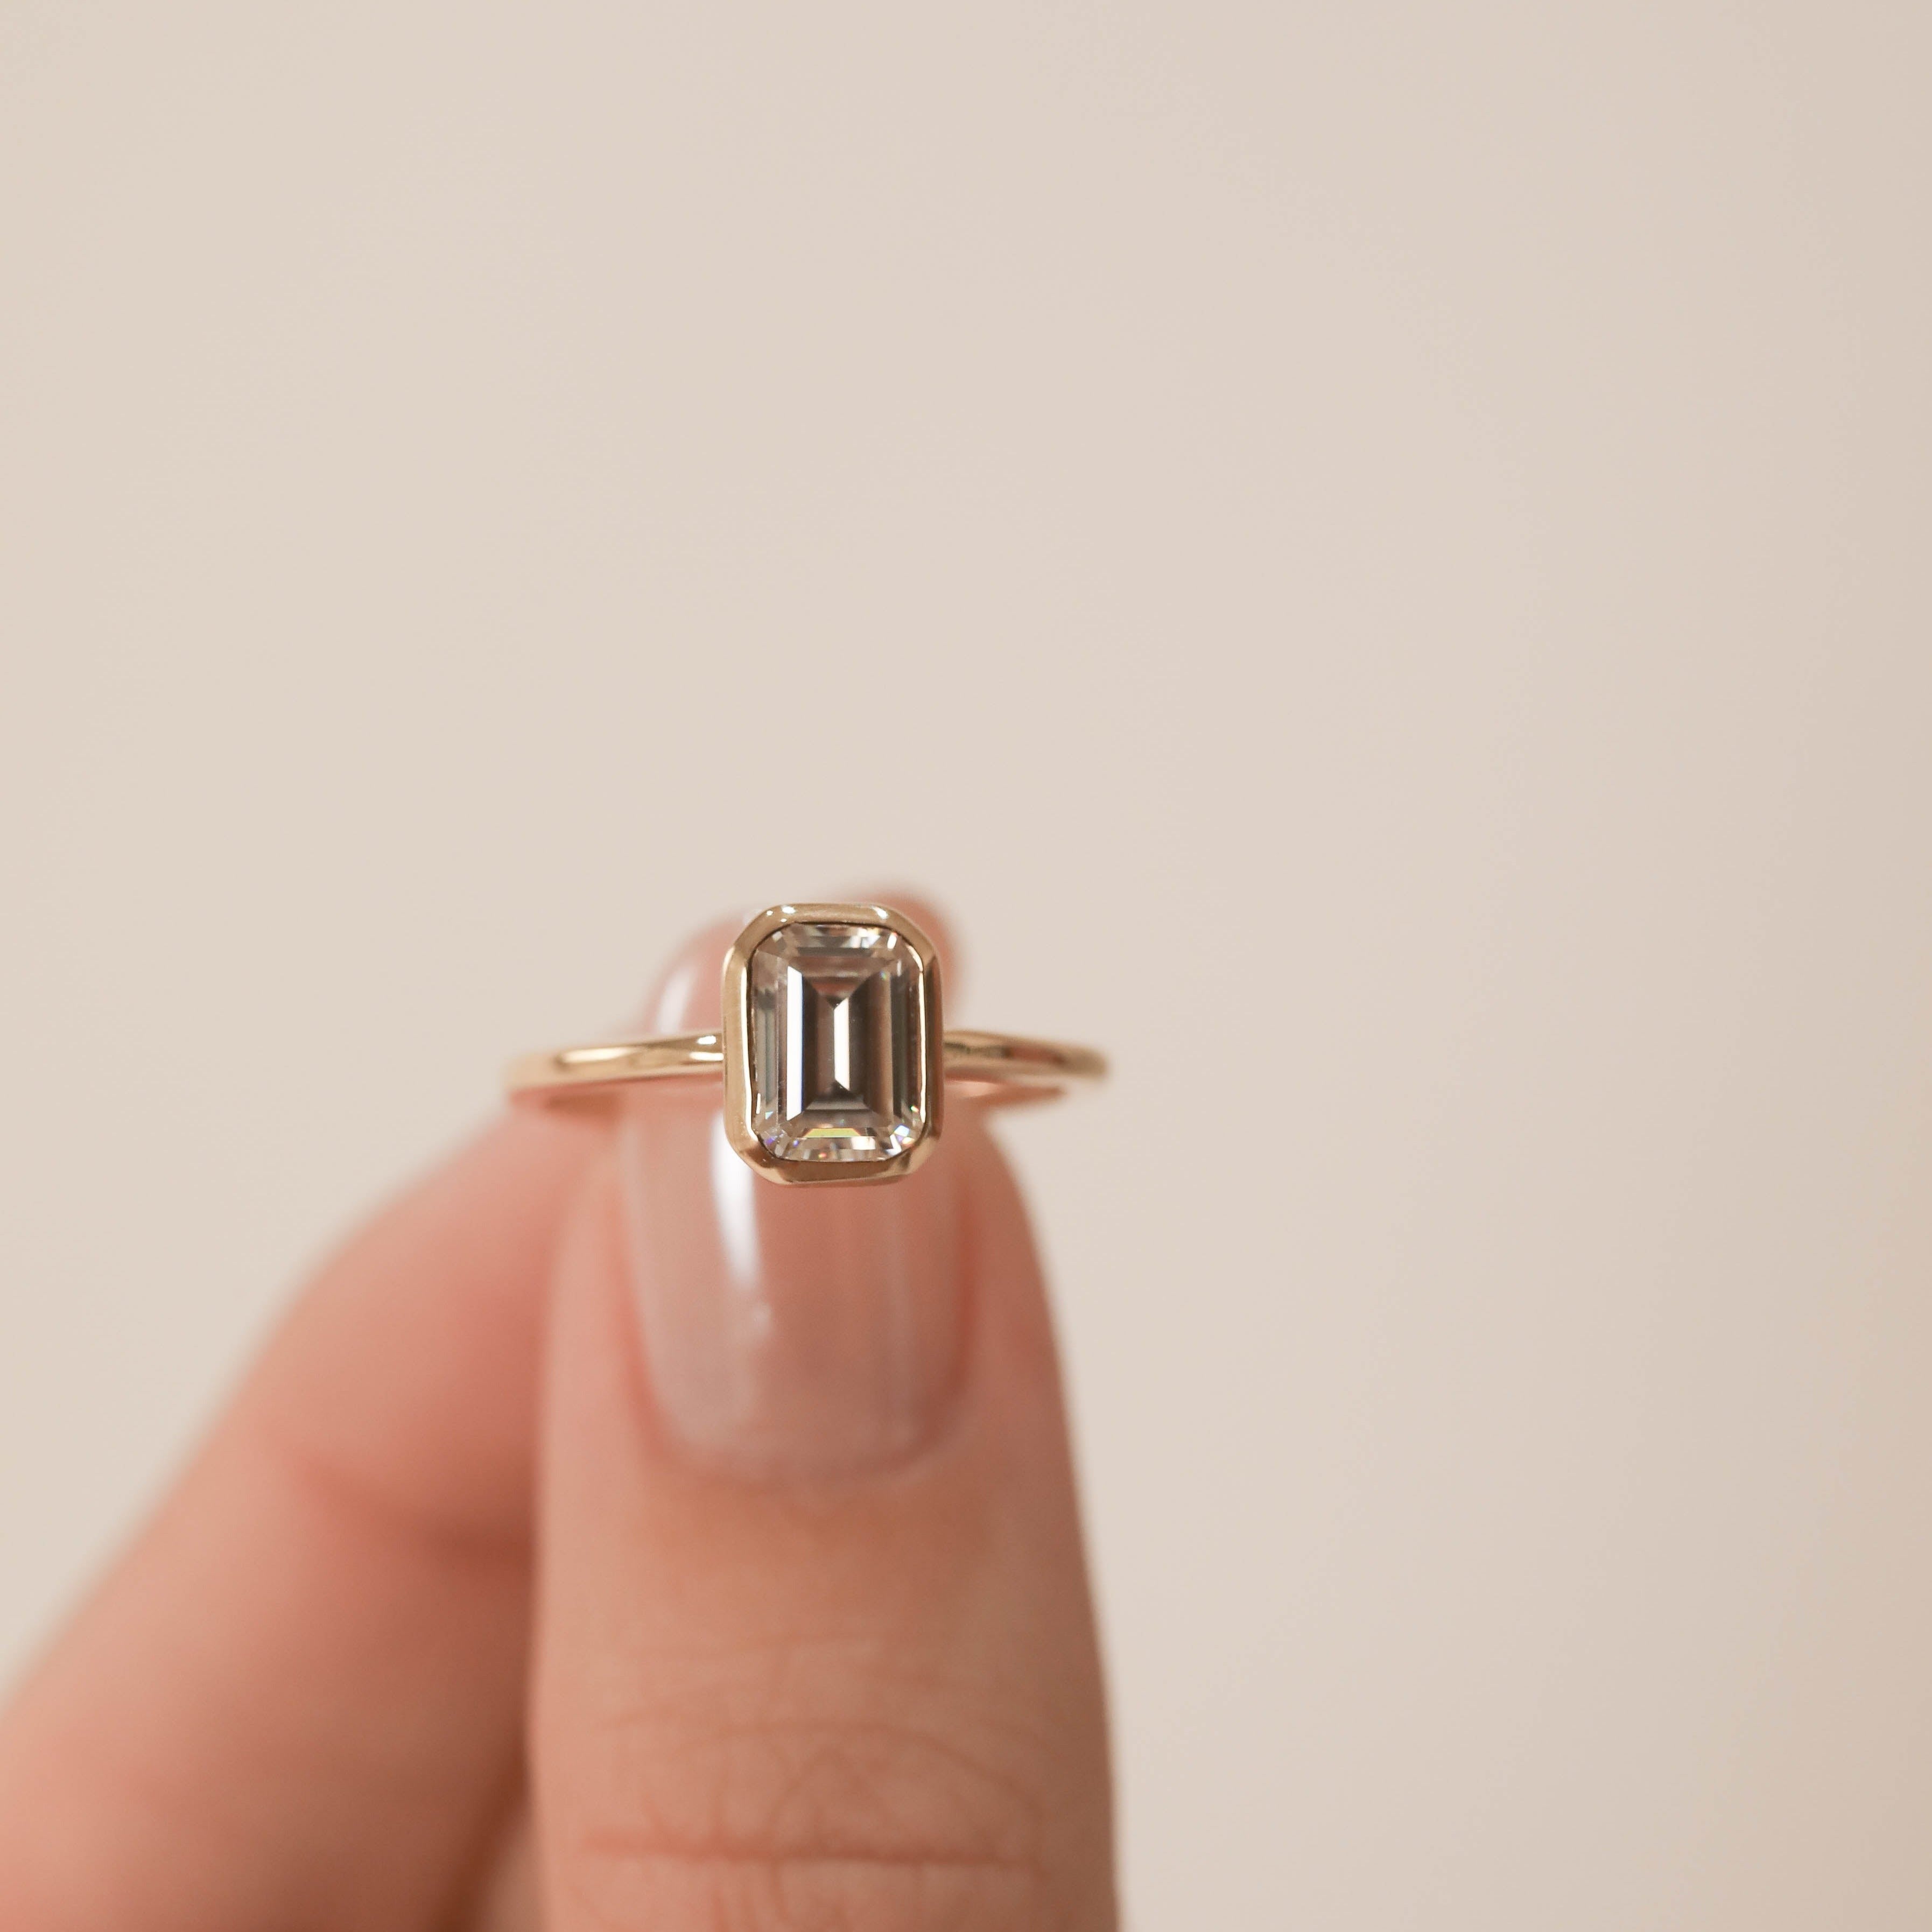 0.92 CT-3.24 CT Emerald Cut Solitaire Moissanite Engagement Ring